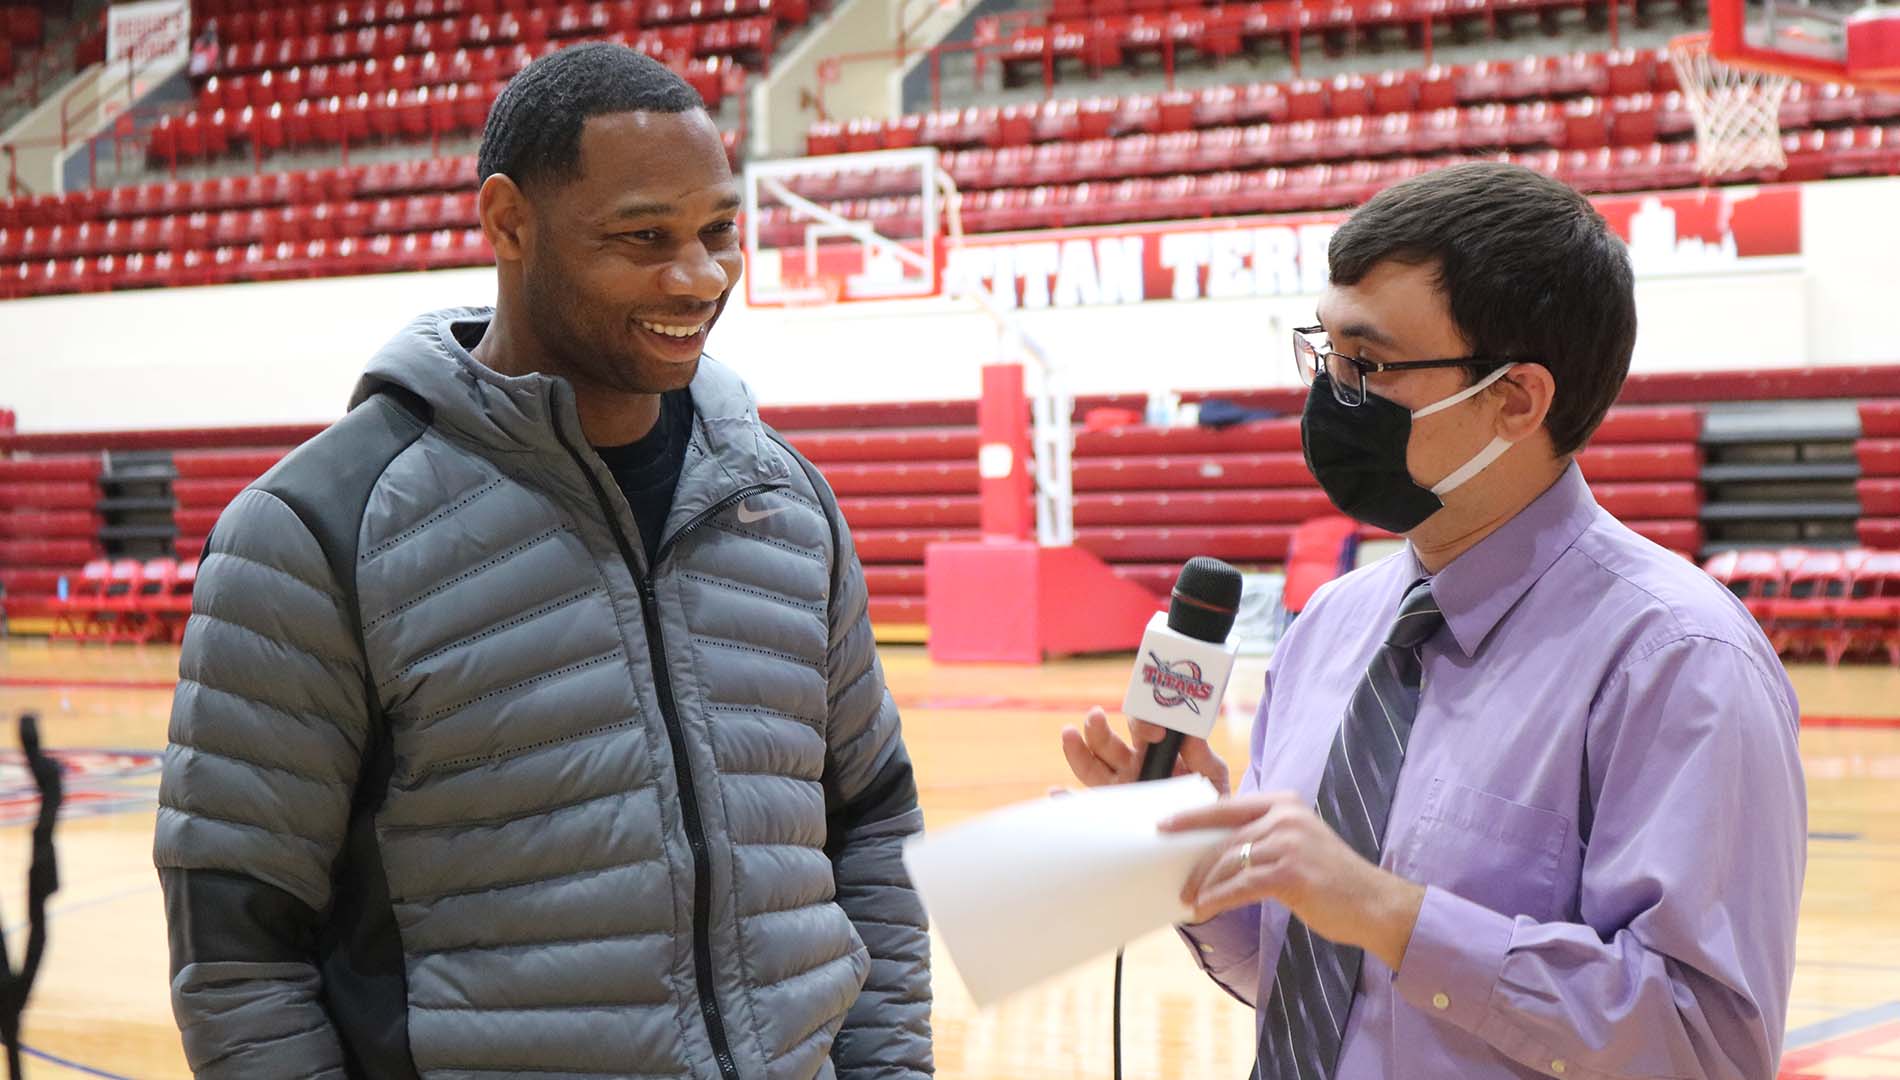 Willie Green '03 is interviewed by Detroit Mercy men's basketball commentator Jeremy Otto inside Calihan Hall before the Pelicans faced the Pistons.